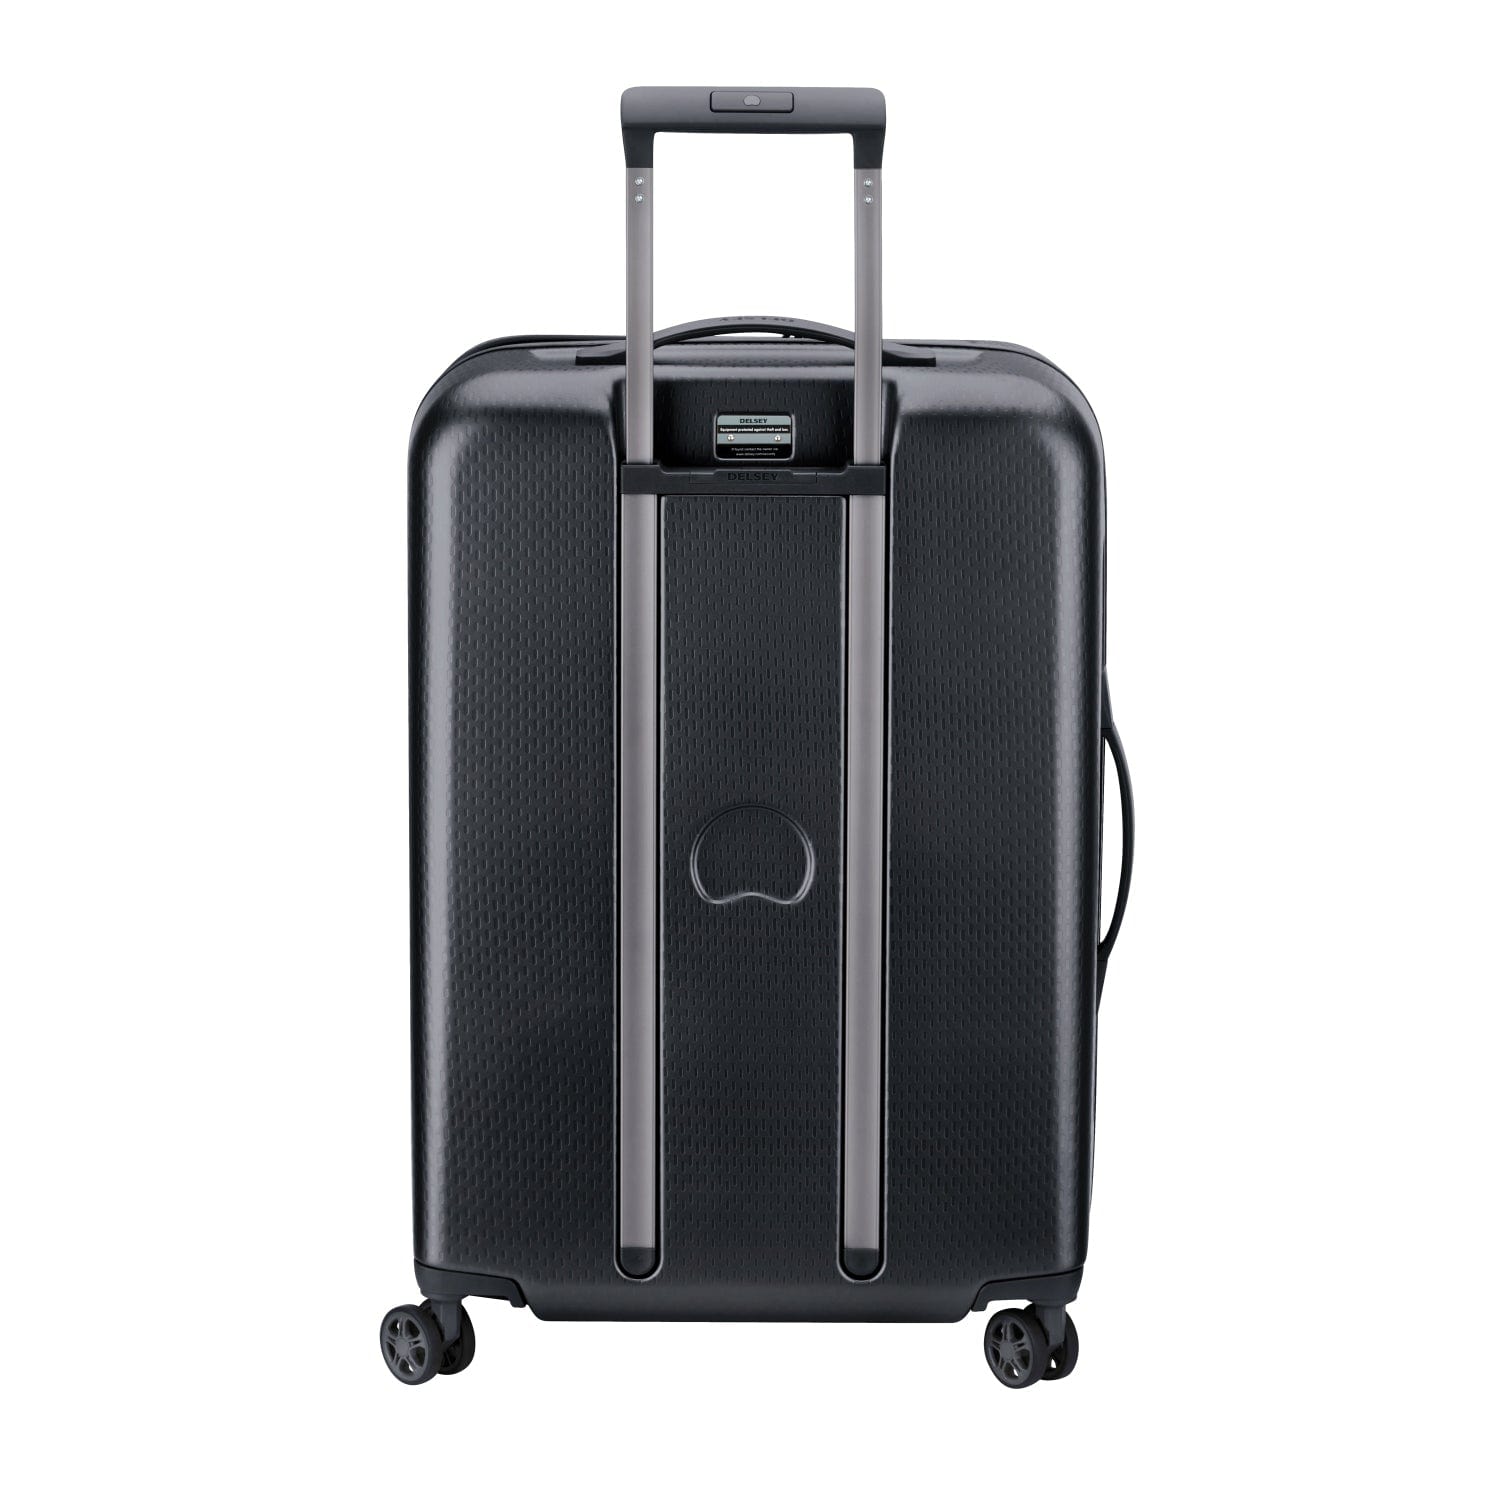 Delsey Turenne 65cm 4 Double Wheel Check-In Luggage Trolley Black - 00162181000